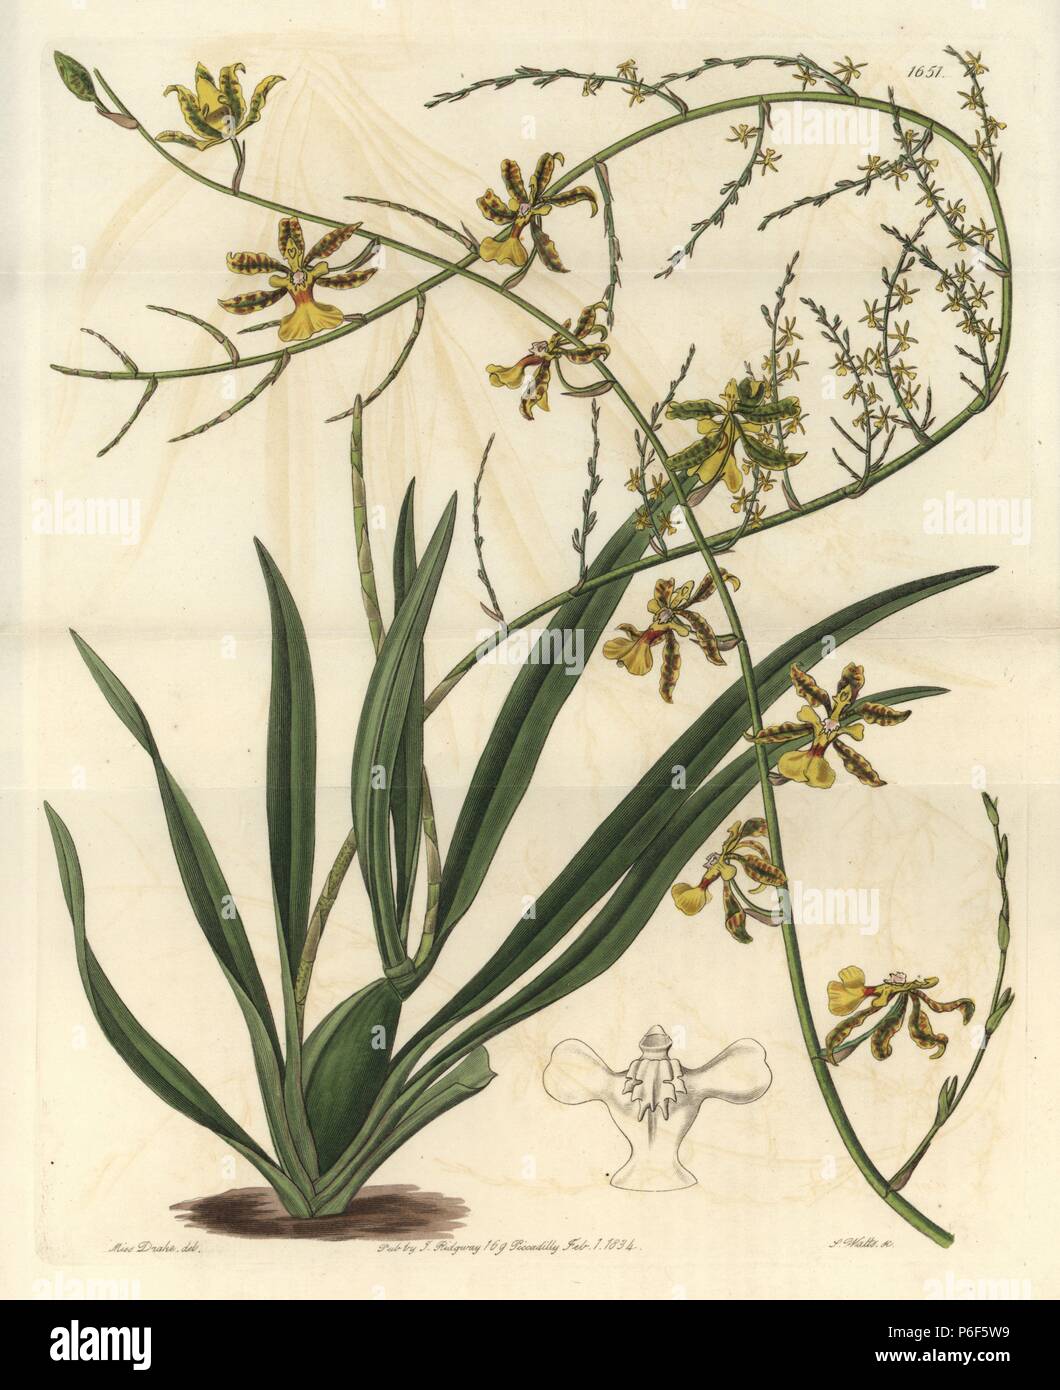 Oncidium baueri orchid (Lofty oncidium, Oncidium altissimum). Handcoloured copperplate engraving by S. Watts after an illustration by Miss Drake from Sydenham Edwards' 'The Botanical Register,' London, Ridgway, 1833. Sarah Anne Drake (1803-1857) drew over 1,300 plates for the botanist John Lindley, including many orchids. Stock Photo